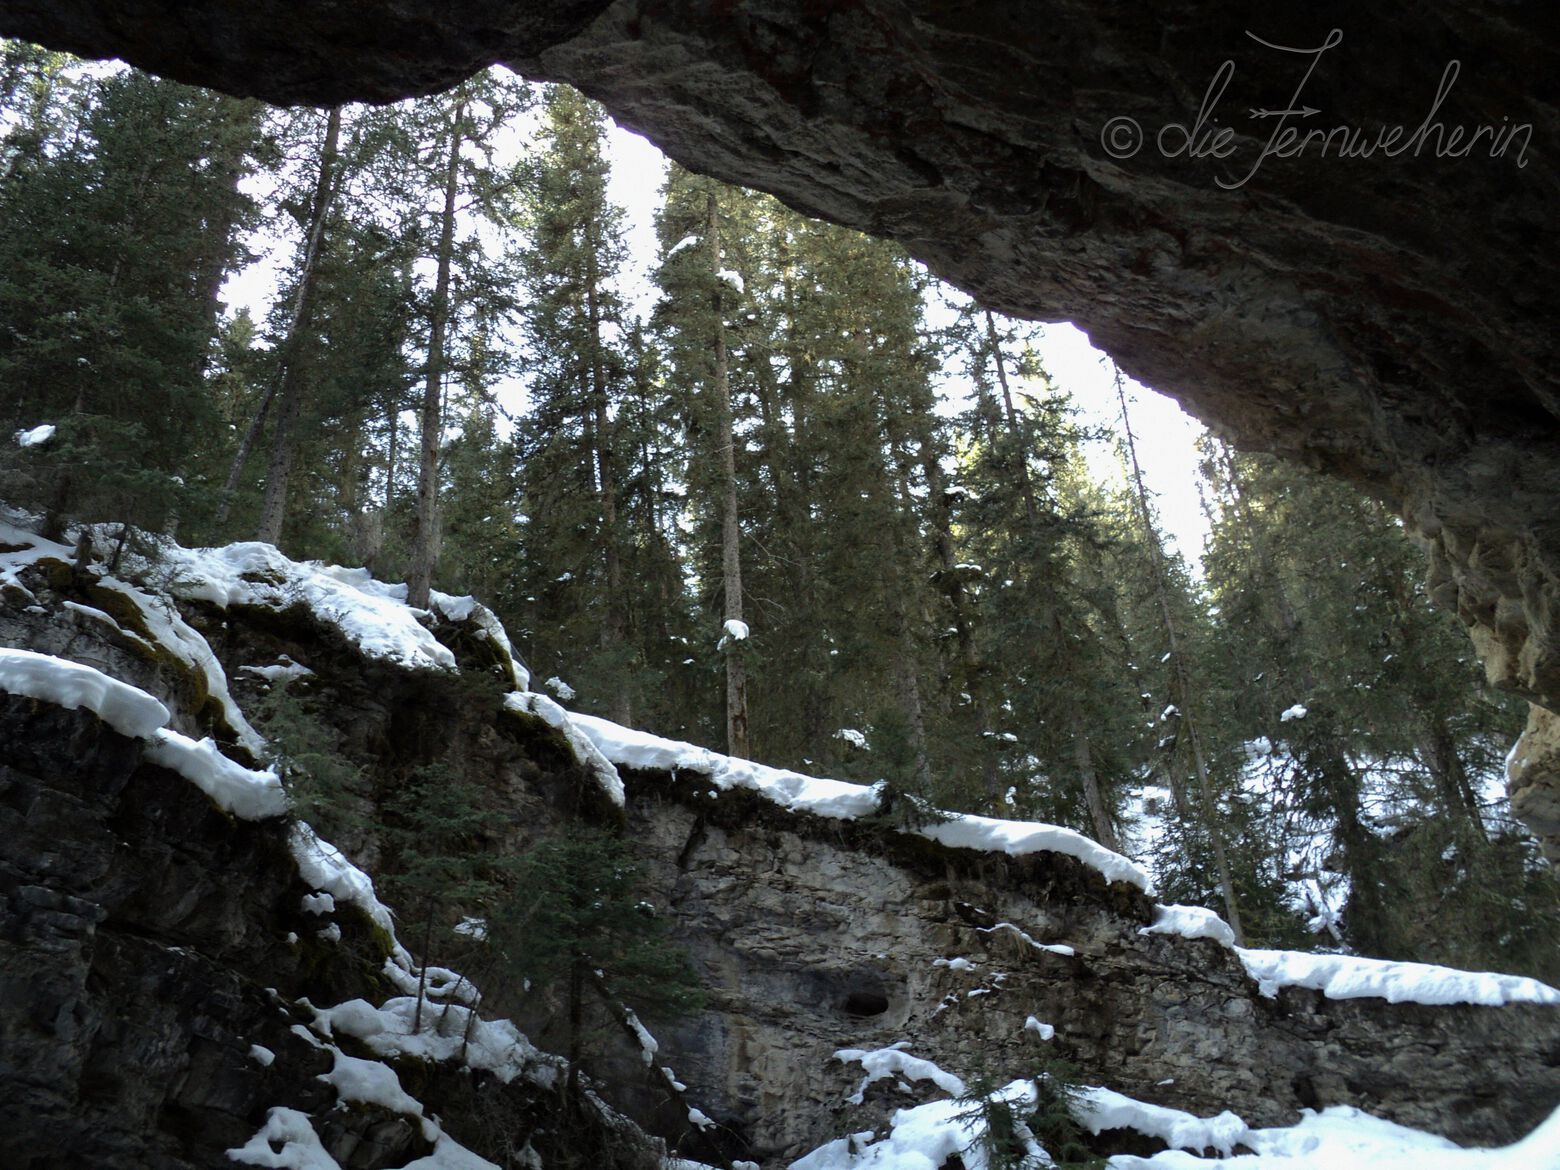 The view from the catwalk at the bottom of Johnston Canyon in Banff National Park, looking up at the canyon walls.